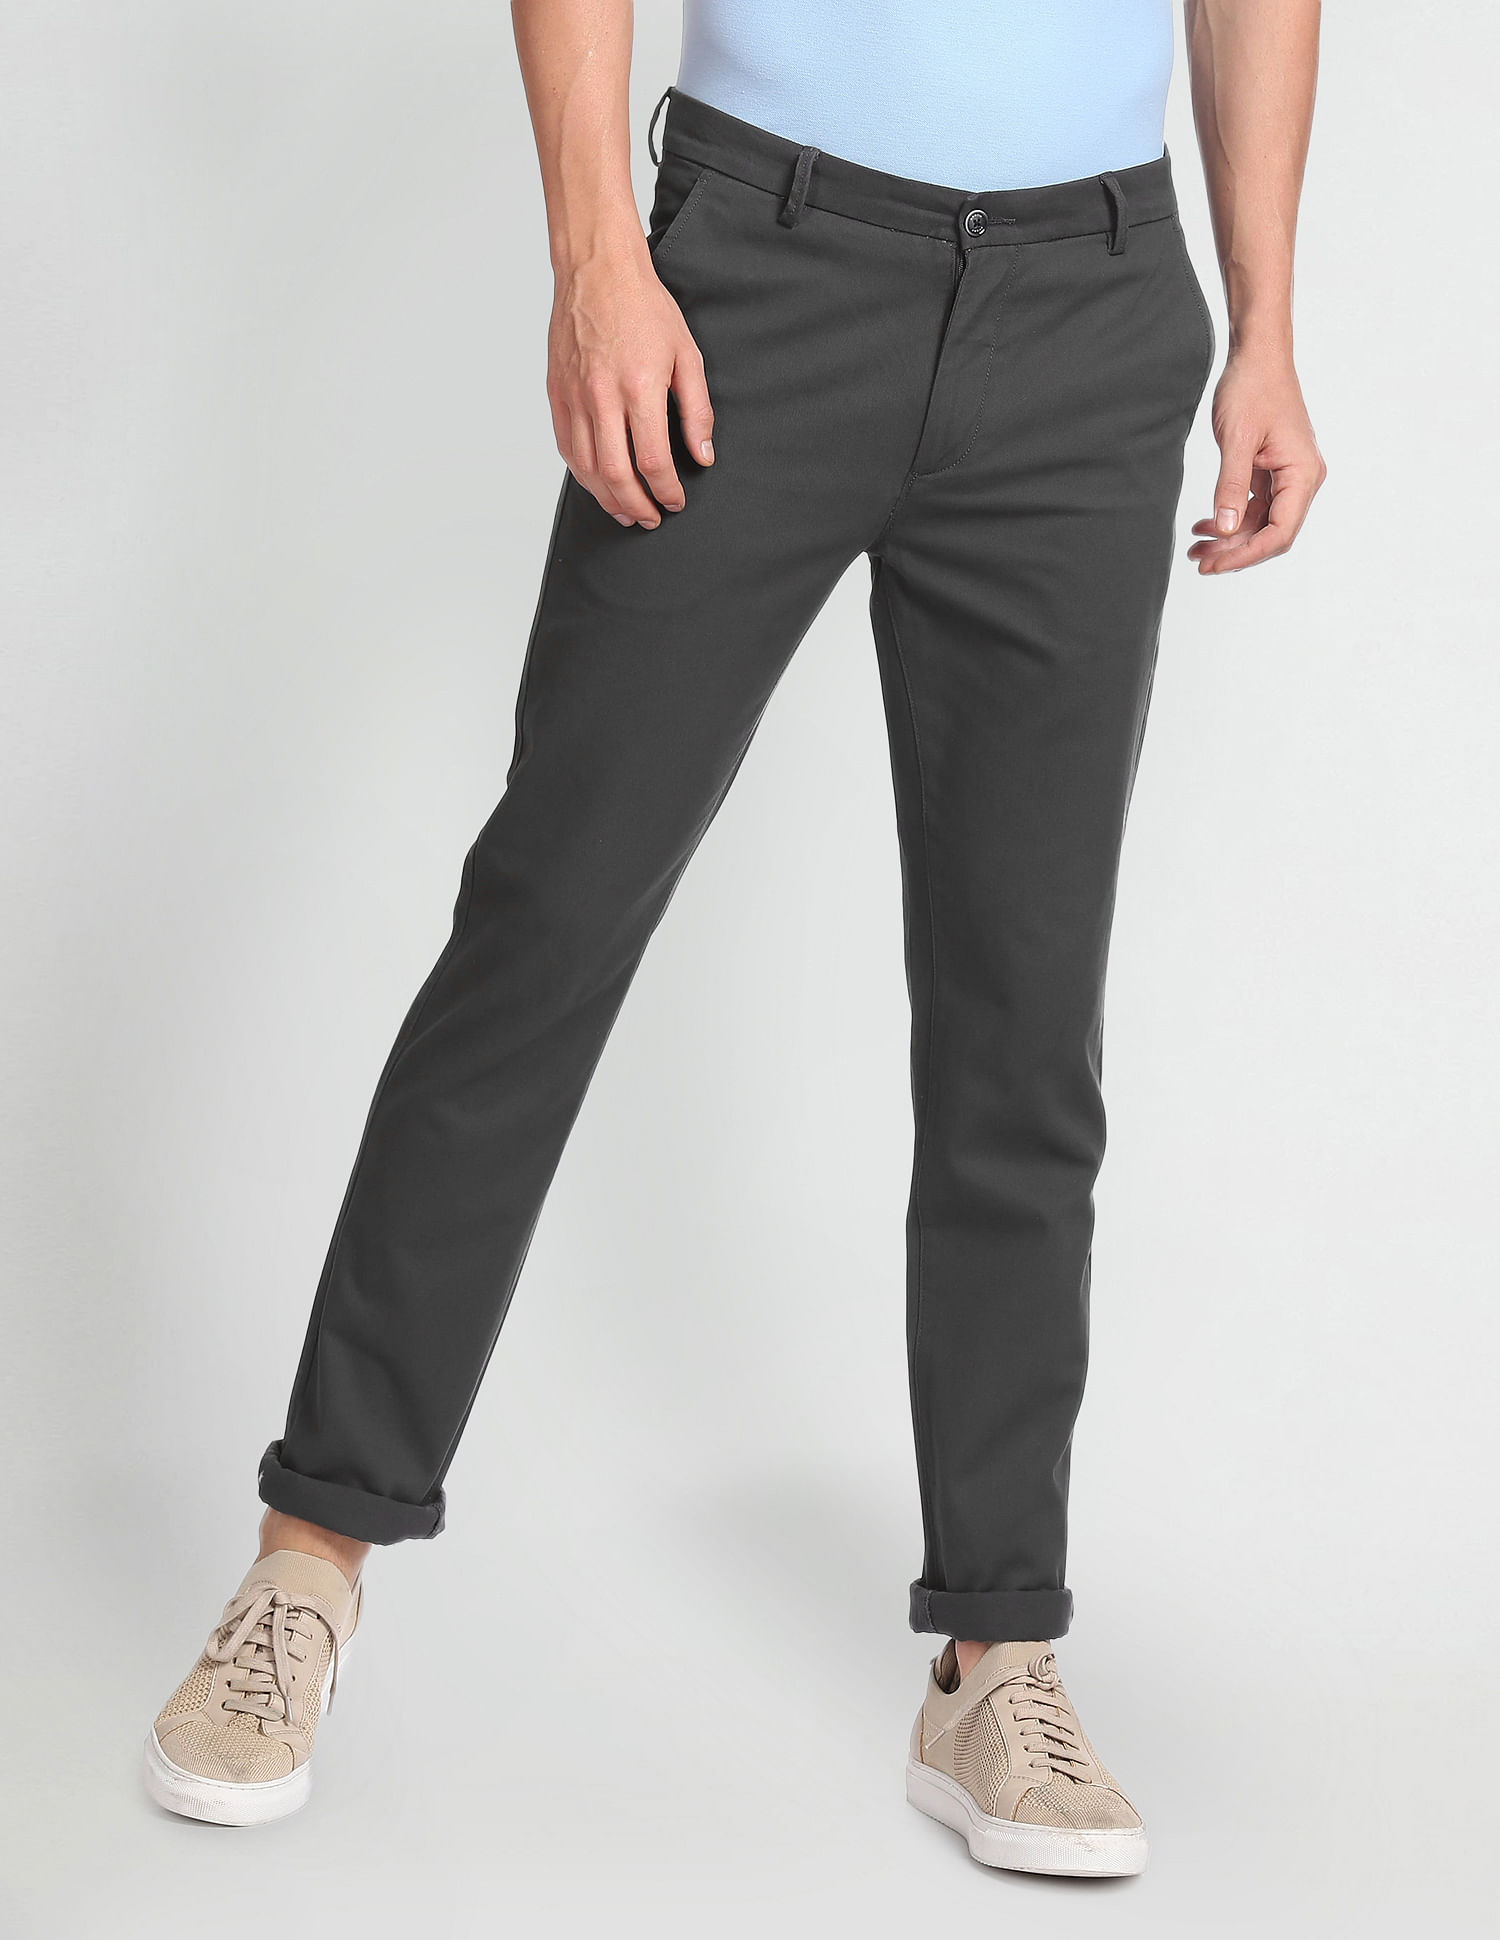 SANDRO Slim-fit stretch-cotton twill pants | THE OUTNET